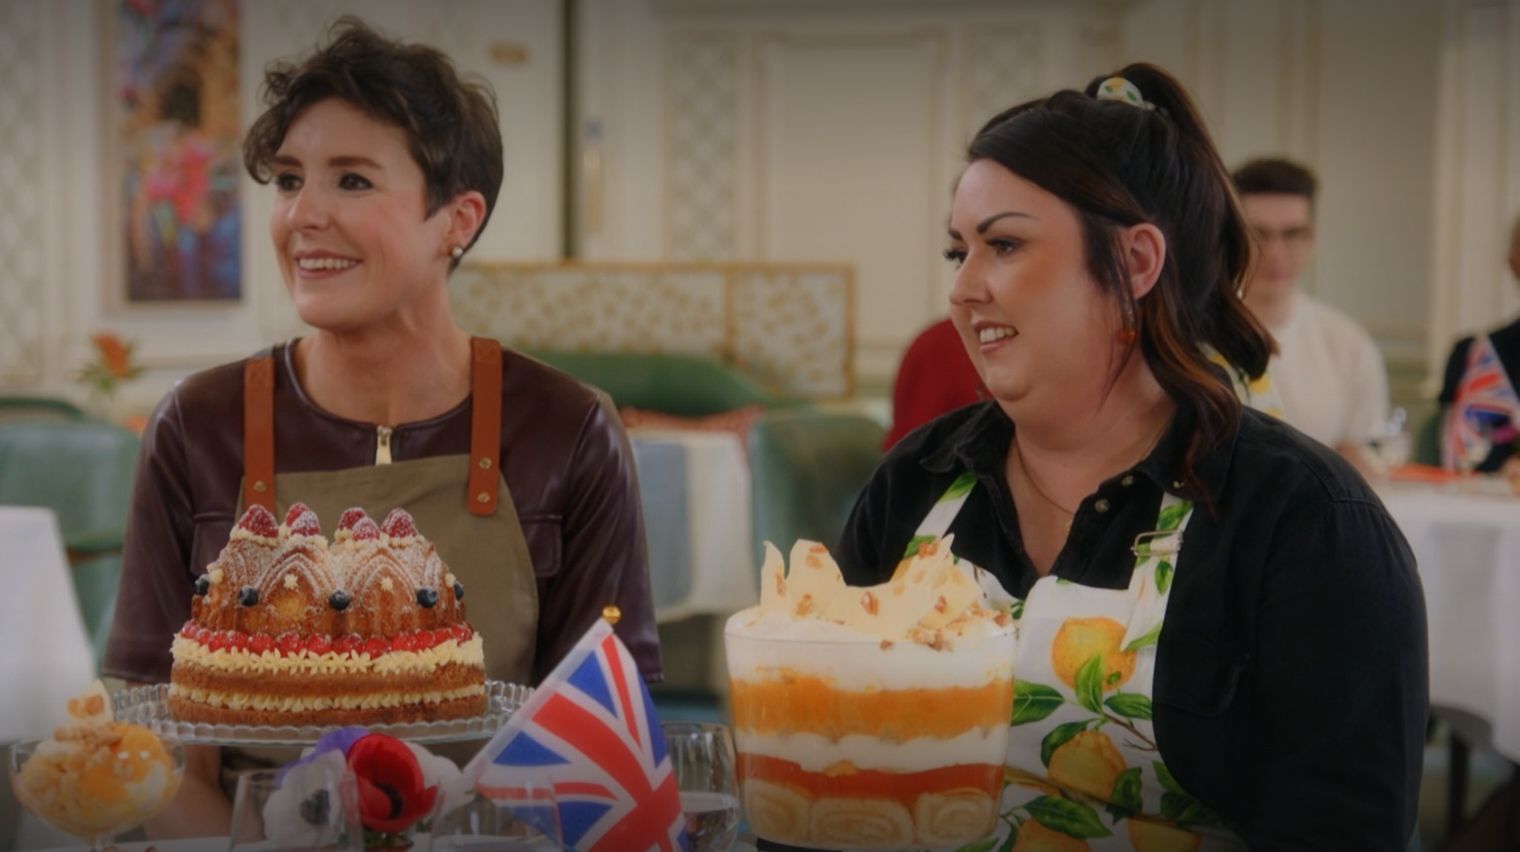 Southport home baker Jemma Melvin has won the BBC One programme - The Jubilee Pudding: 70 Years in the Baking. Photo: BBC